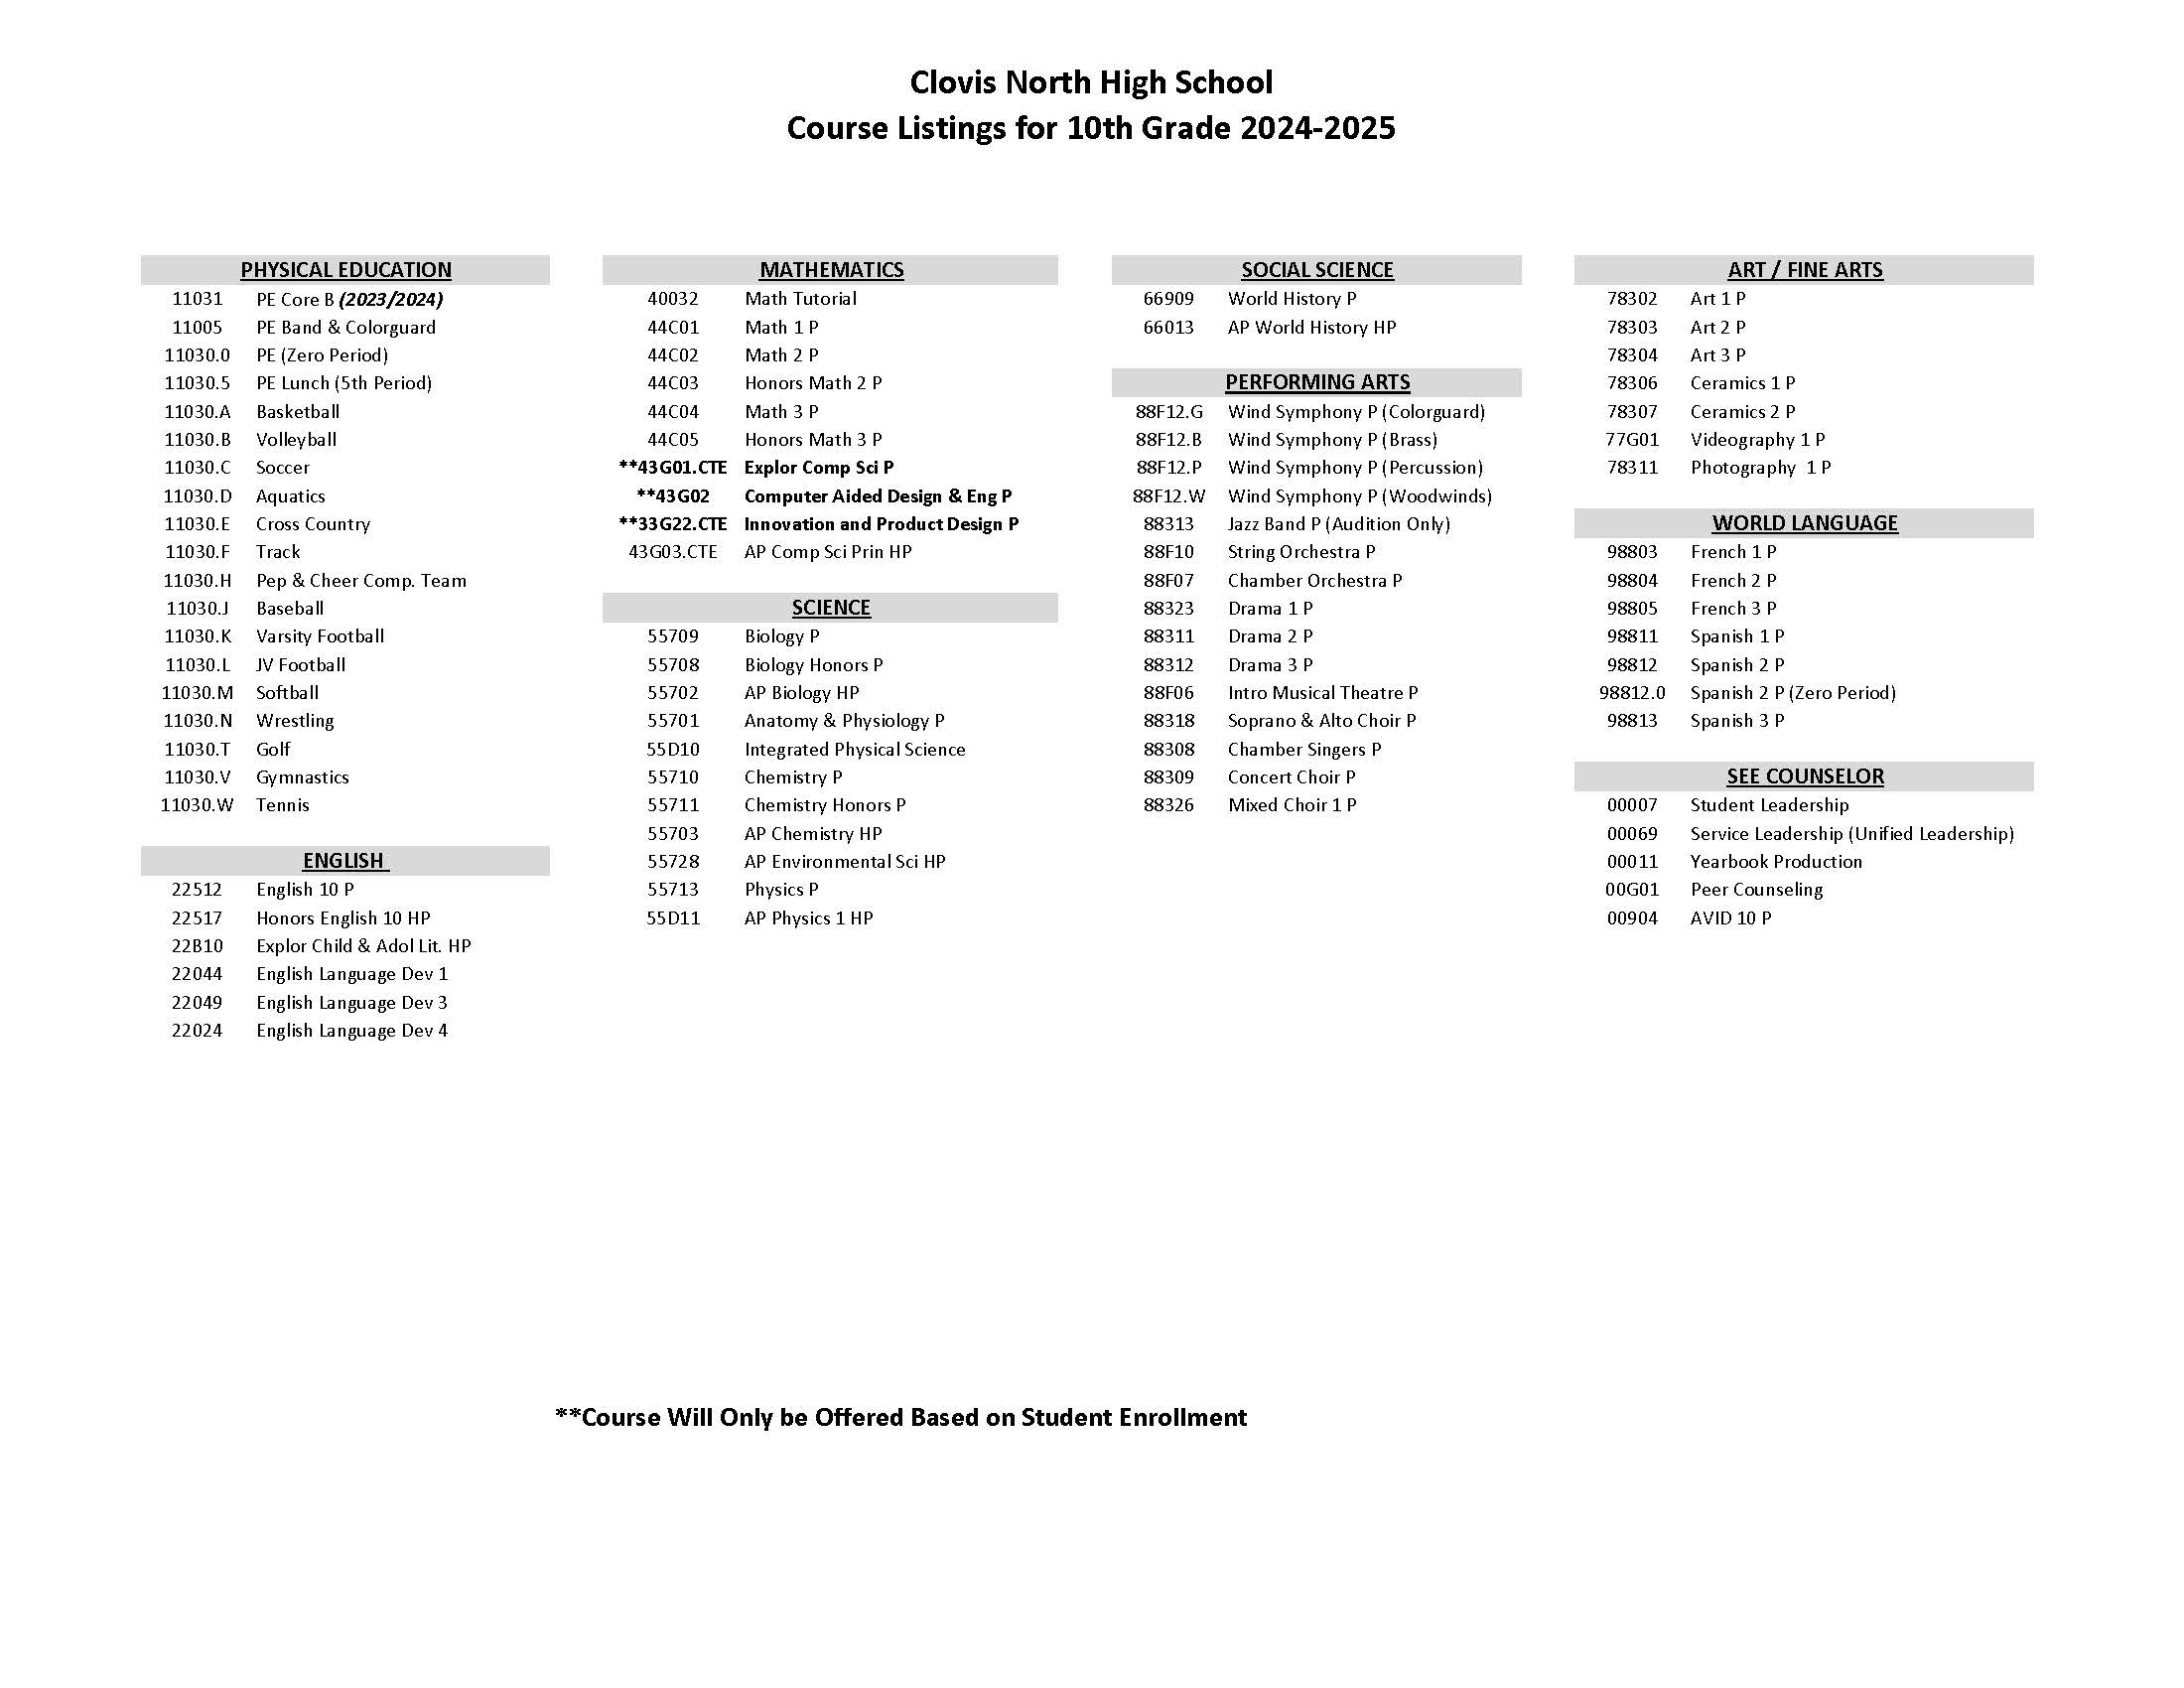 10th grade course listings